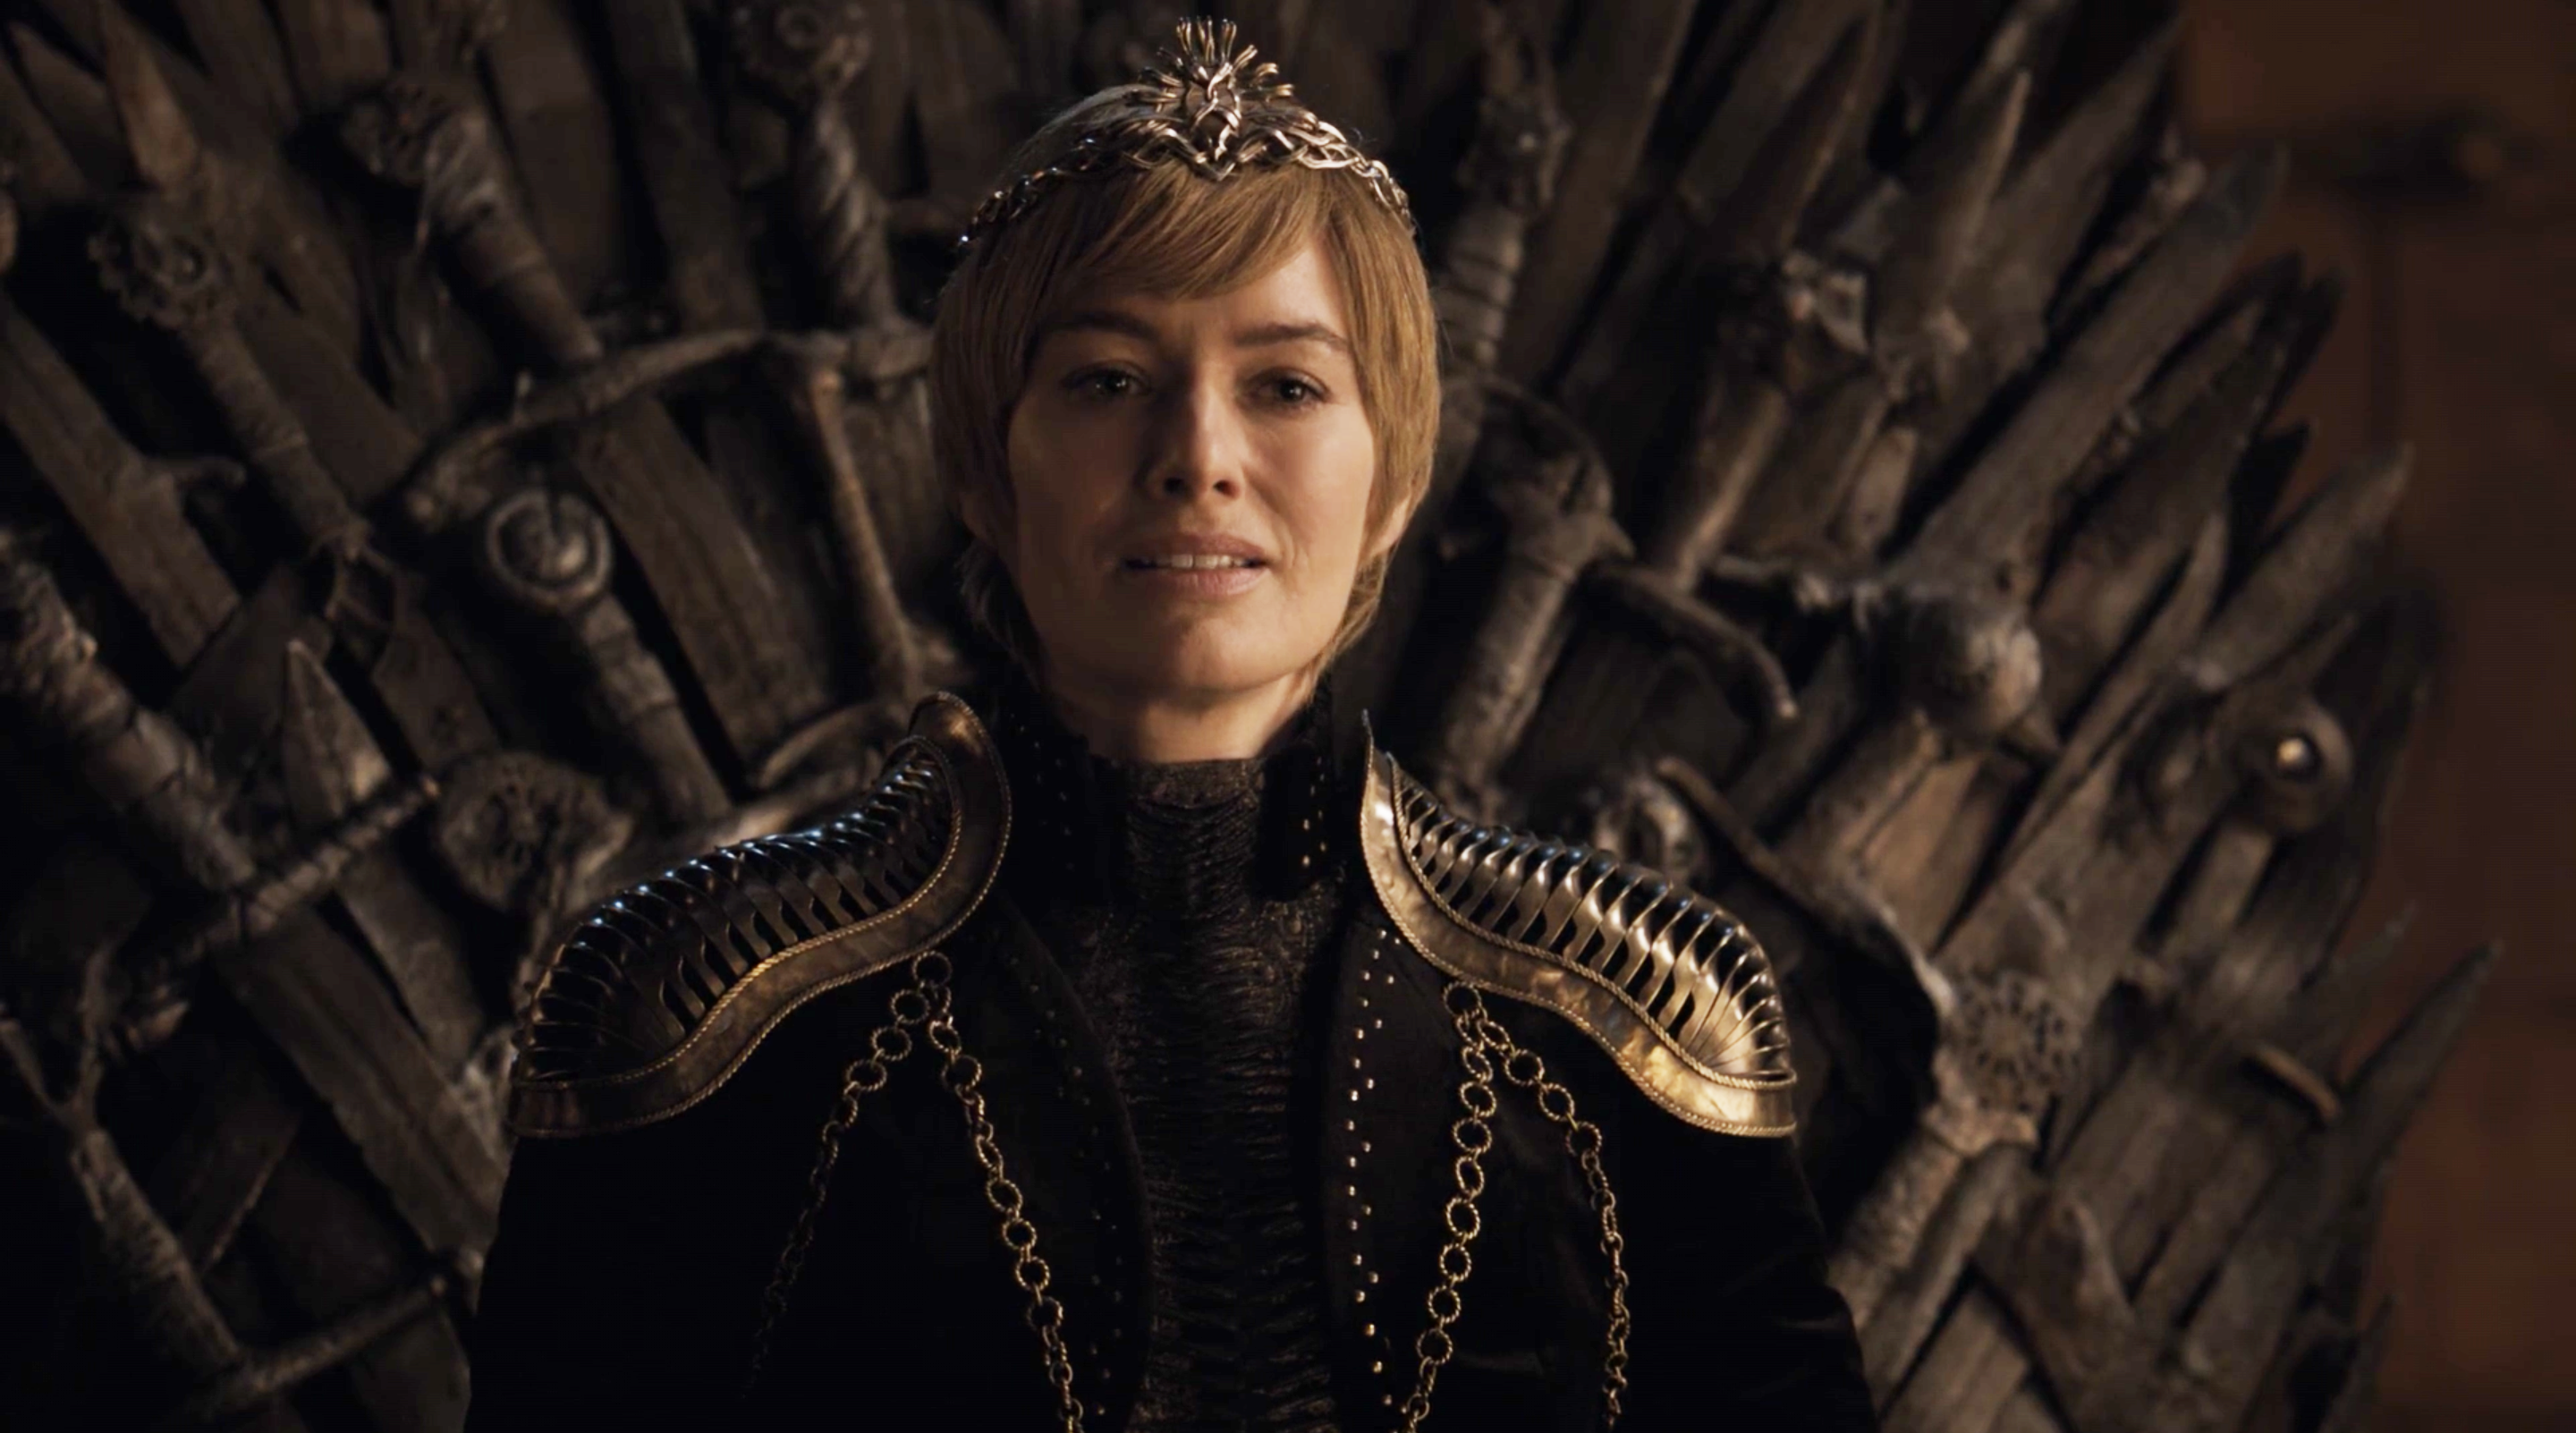 ⚔️ Everyone Has a Role to Play in “Game of Thrones” — What’s Yours? Queen Cersei